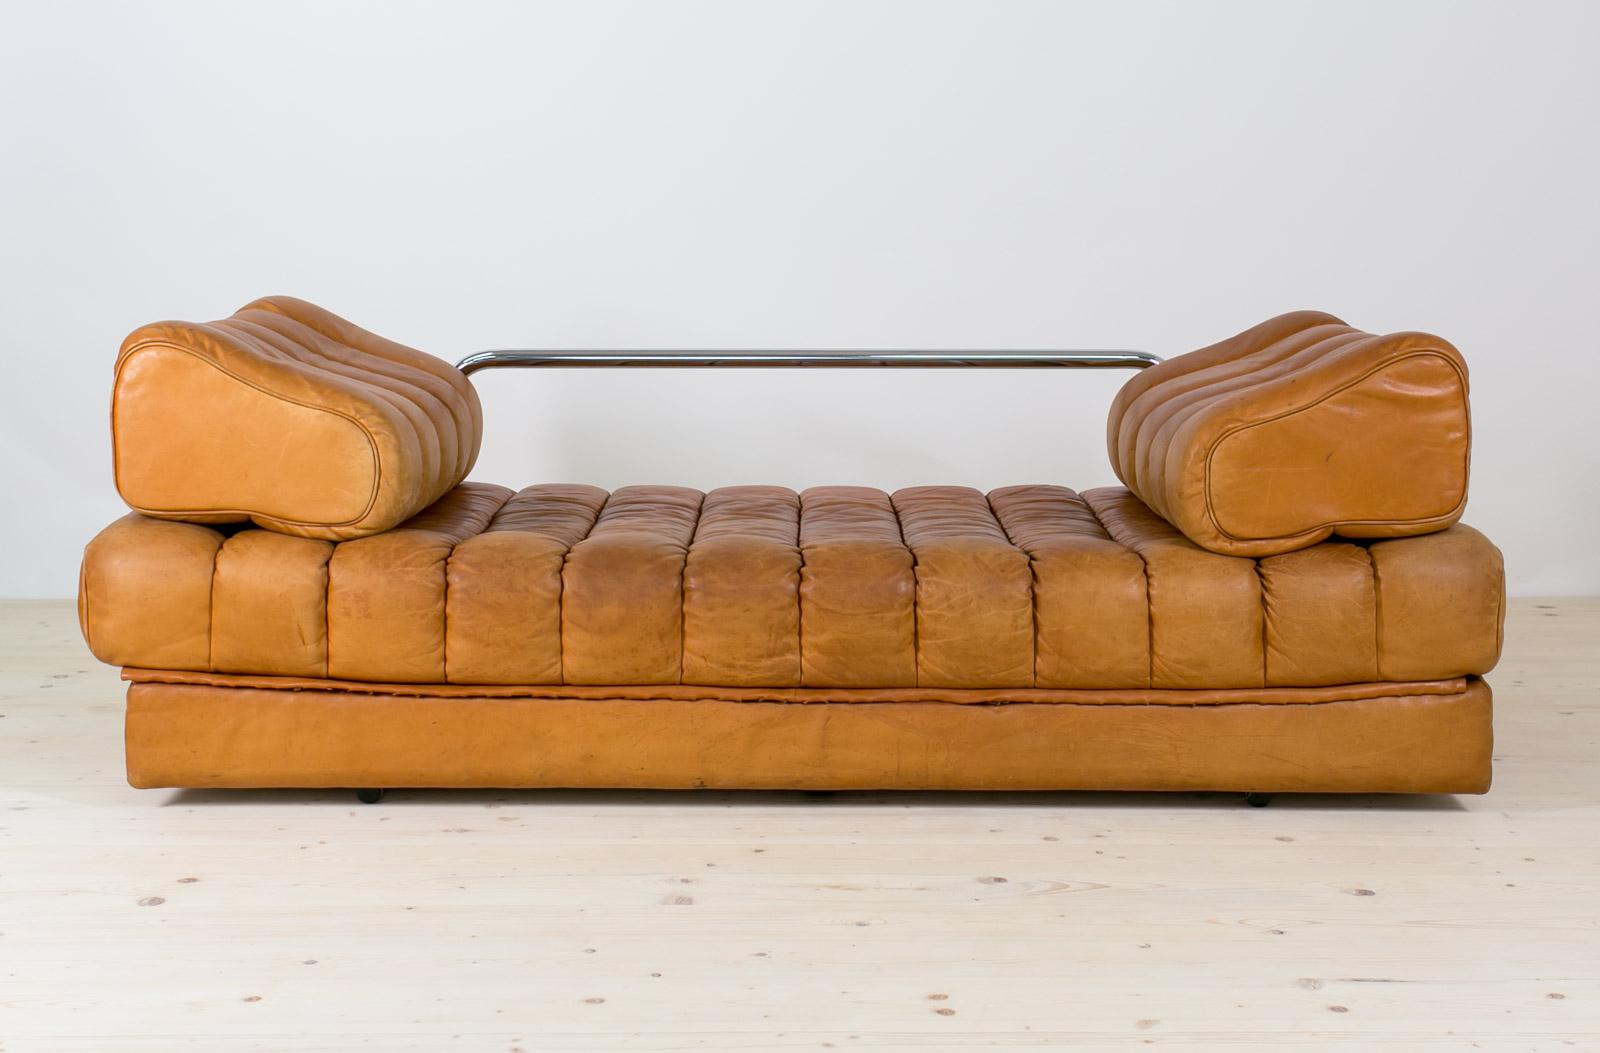 Vintage Swiss De Sede Sofa Bed from the 1960s, model DS 85 7